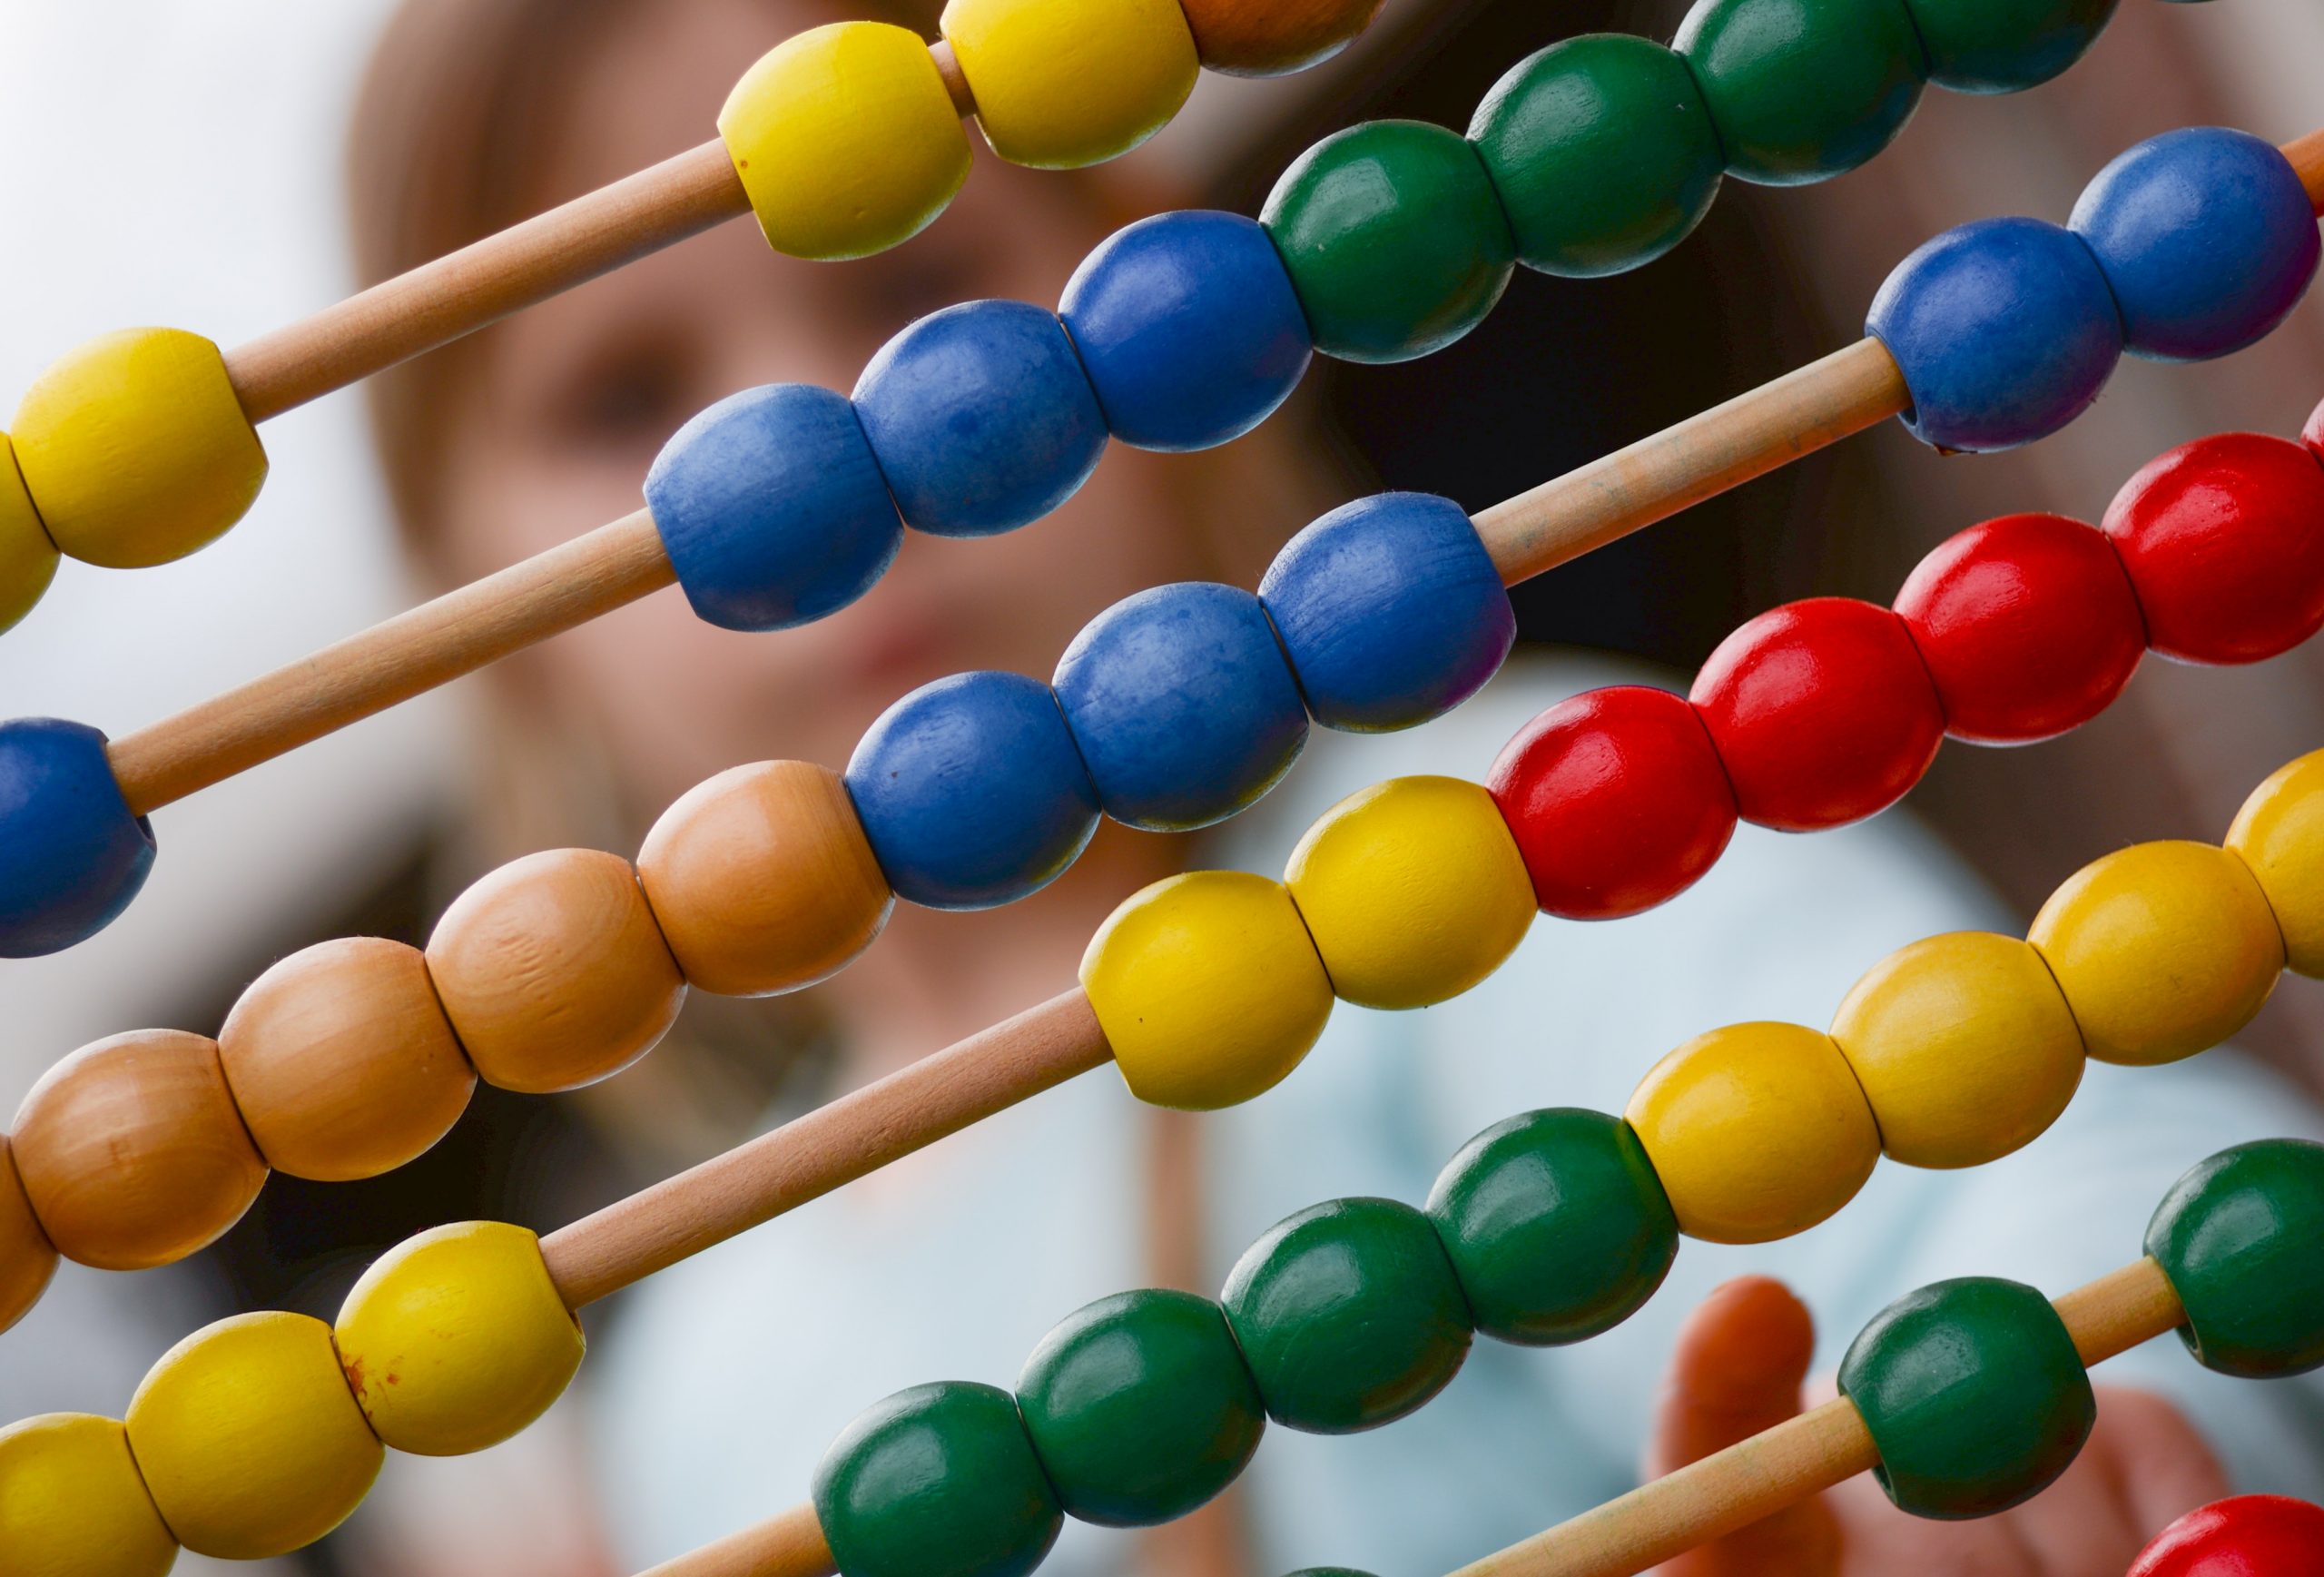 multicolored-abacus-photography-1019470